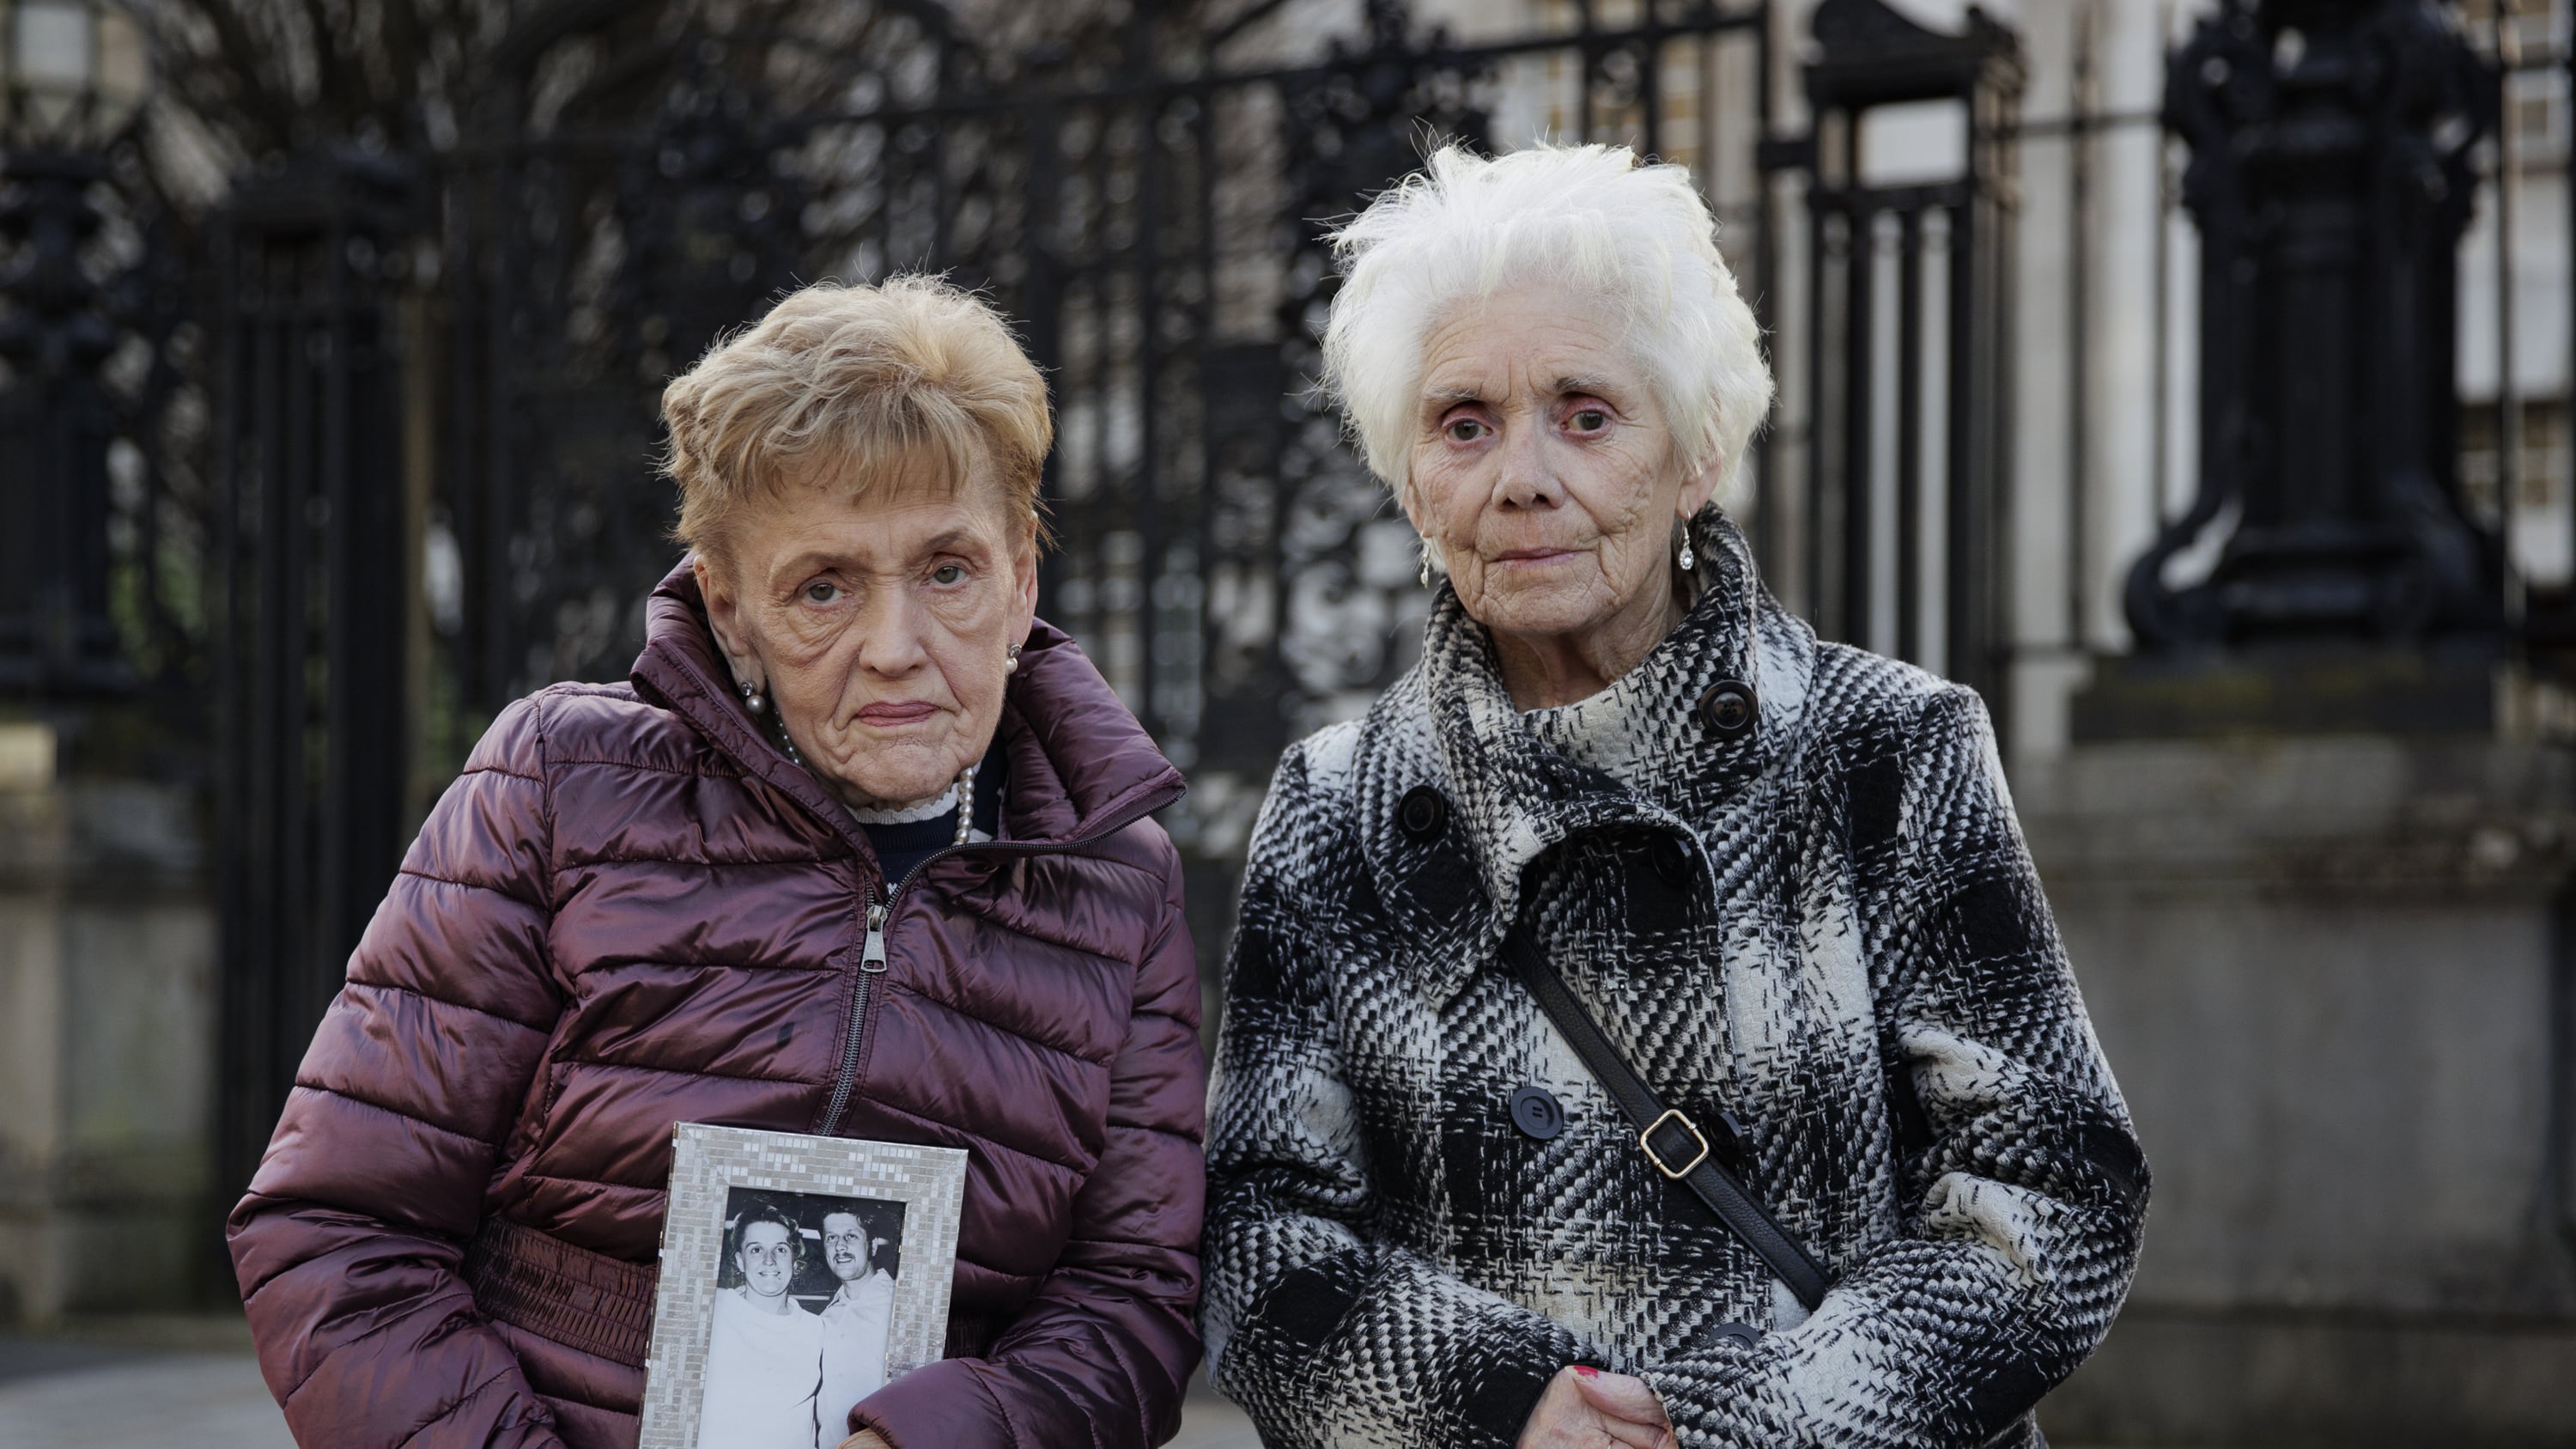 Marie Newton, widow of John Toland, and Mary Loughrey, widow of Jim Loughrey, outside the Royal Courts Justice in Belfast after they settled their cases against the Ministry of Defence and PSNI